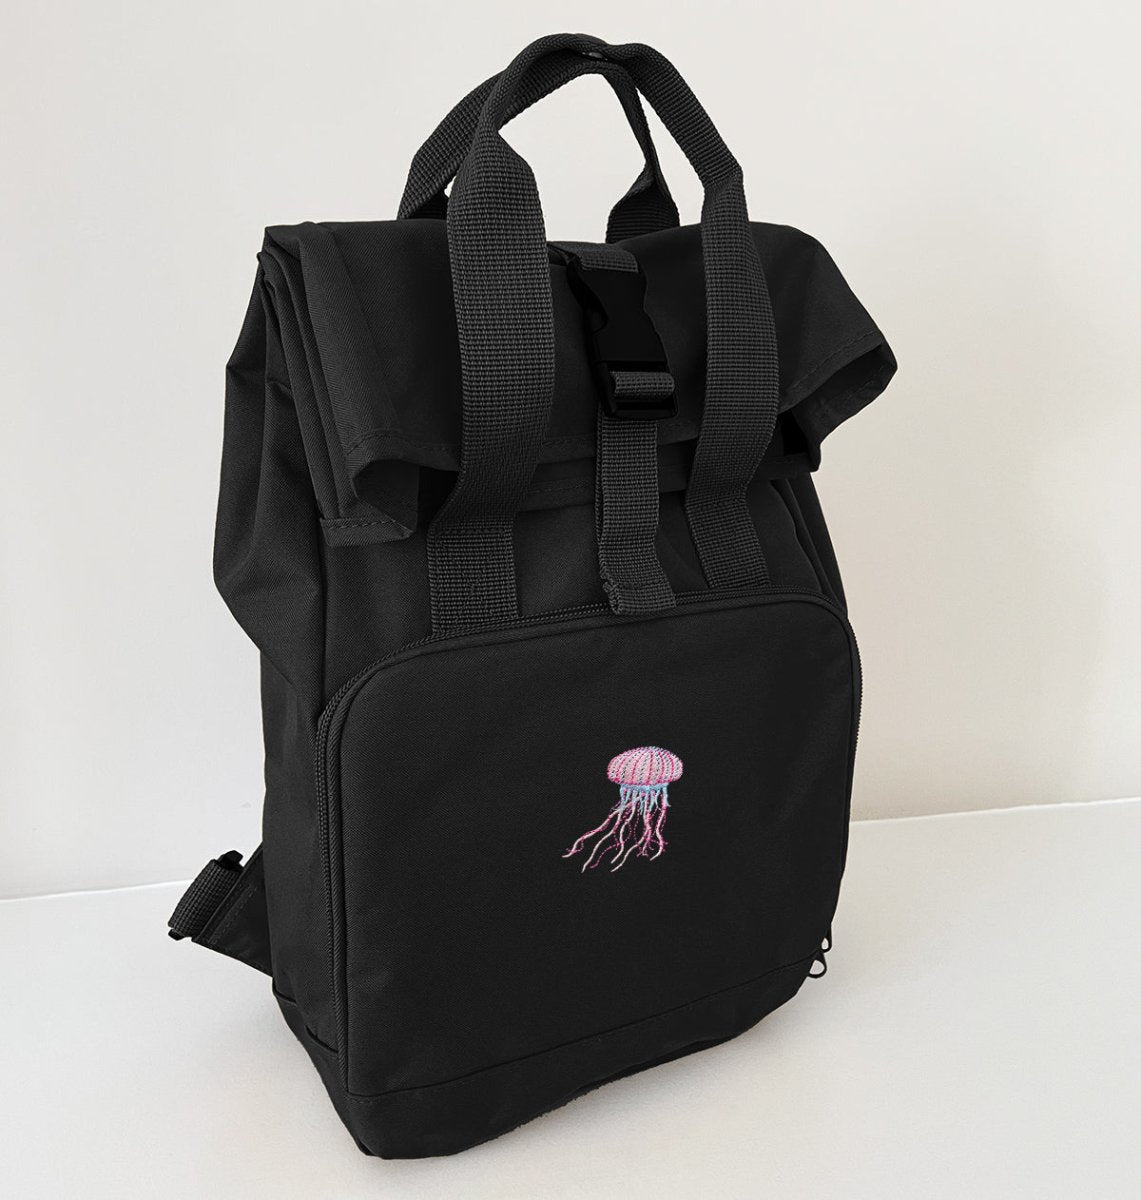 Jellyfish Mini Roll-top Recycled Backpack